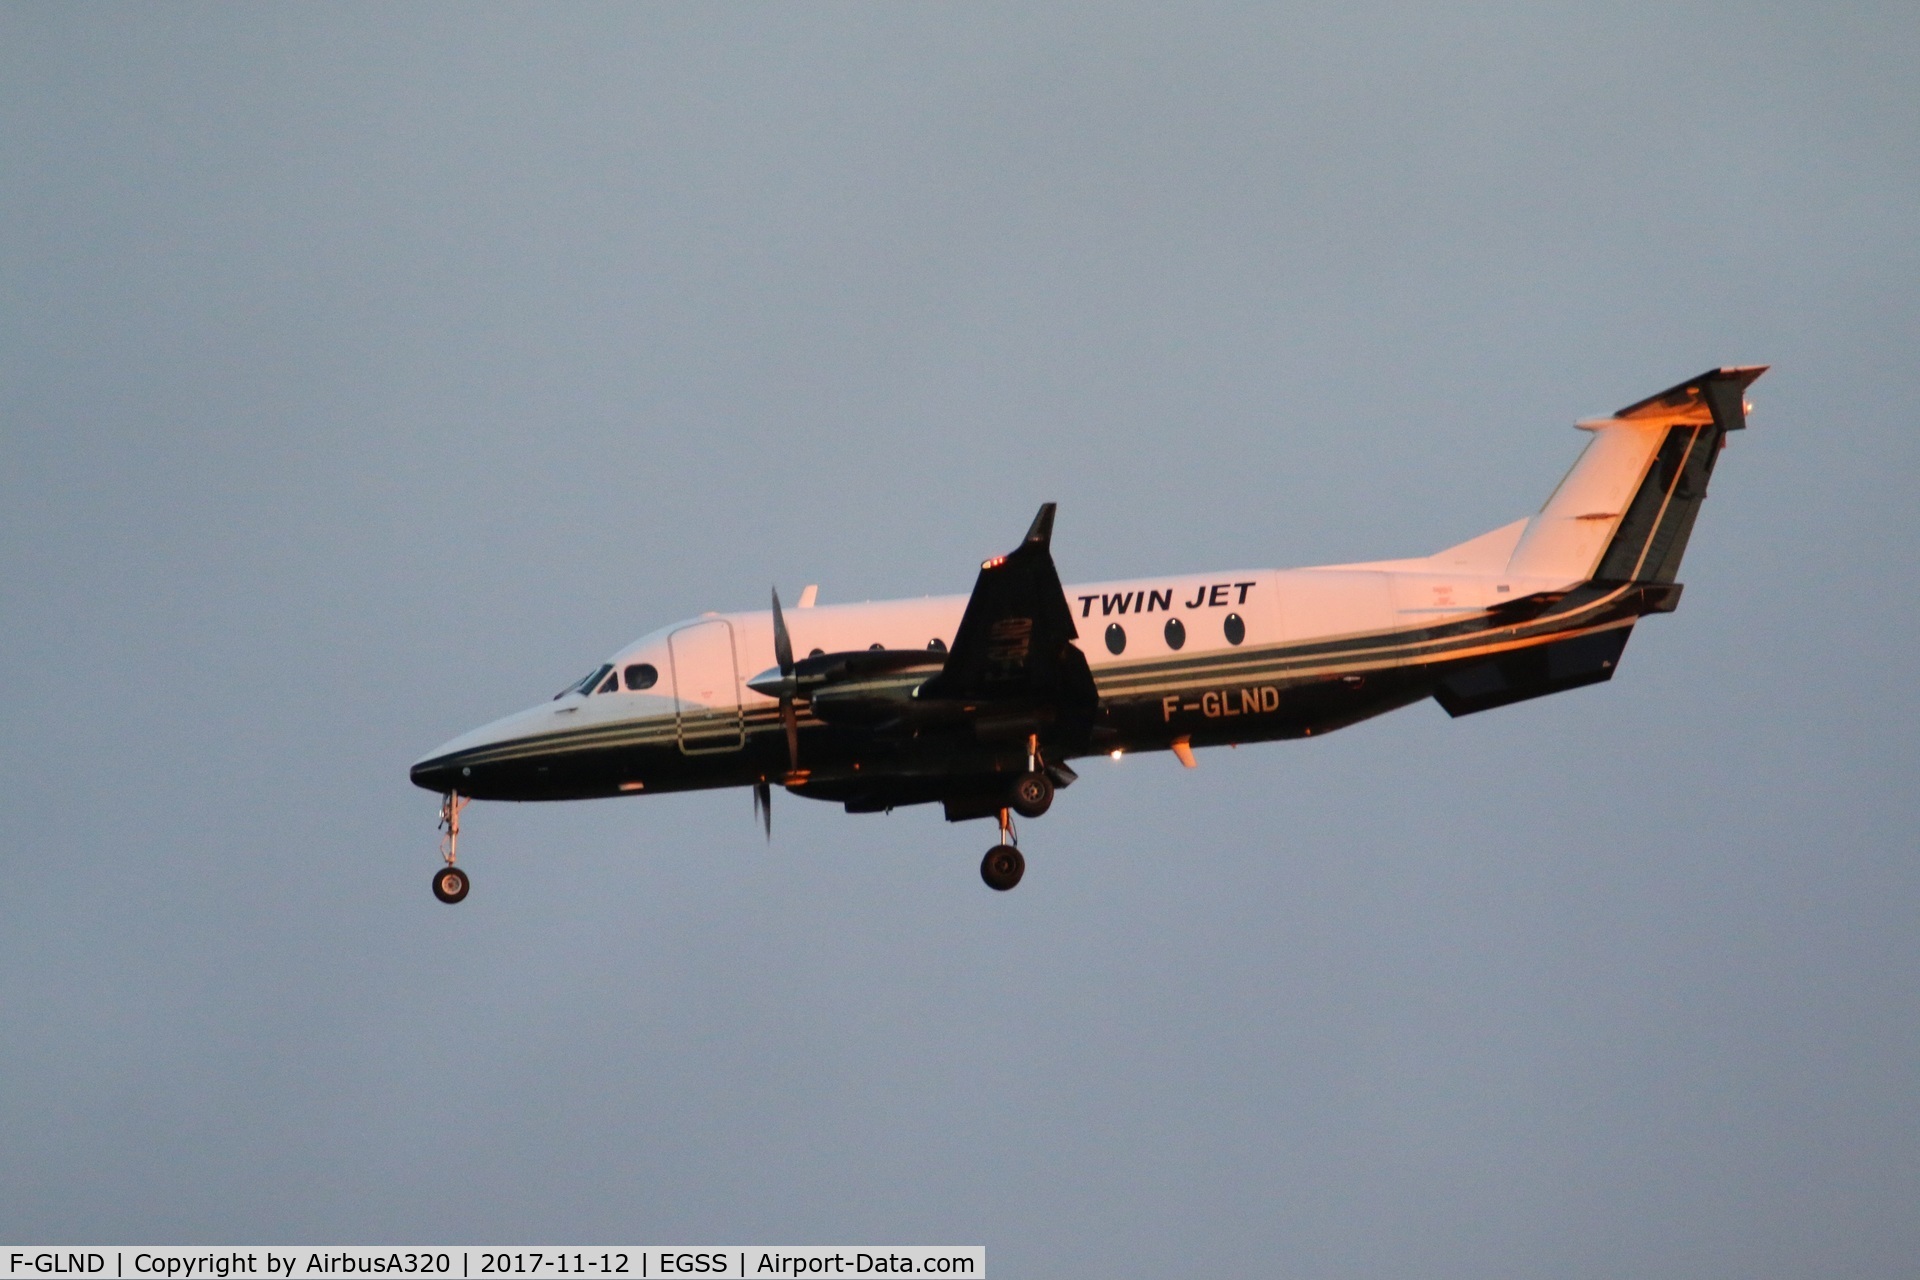 F-GLND, 1996 Beech 1900D C/N UE-196, Arriving at London Stansted as the day light slowly drifts away